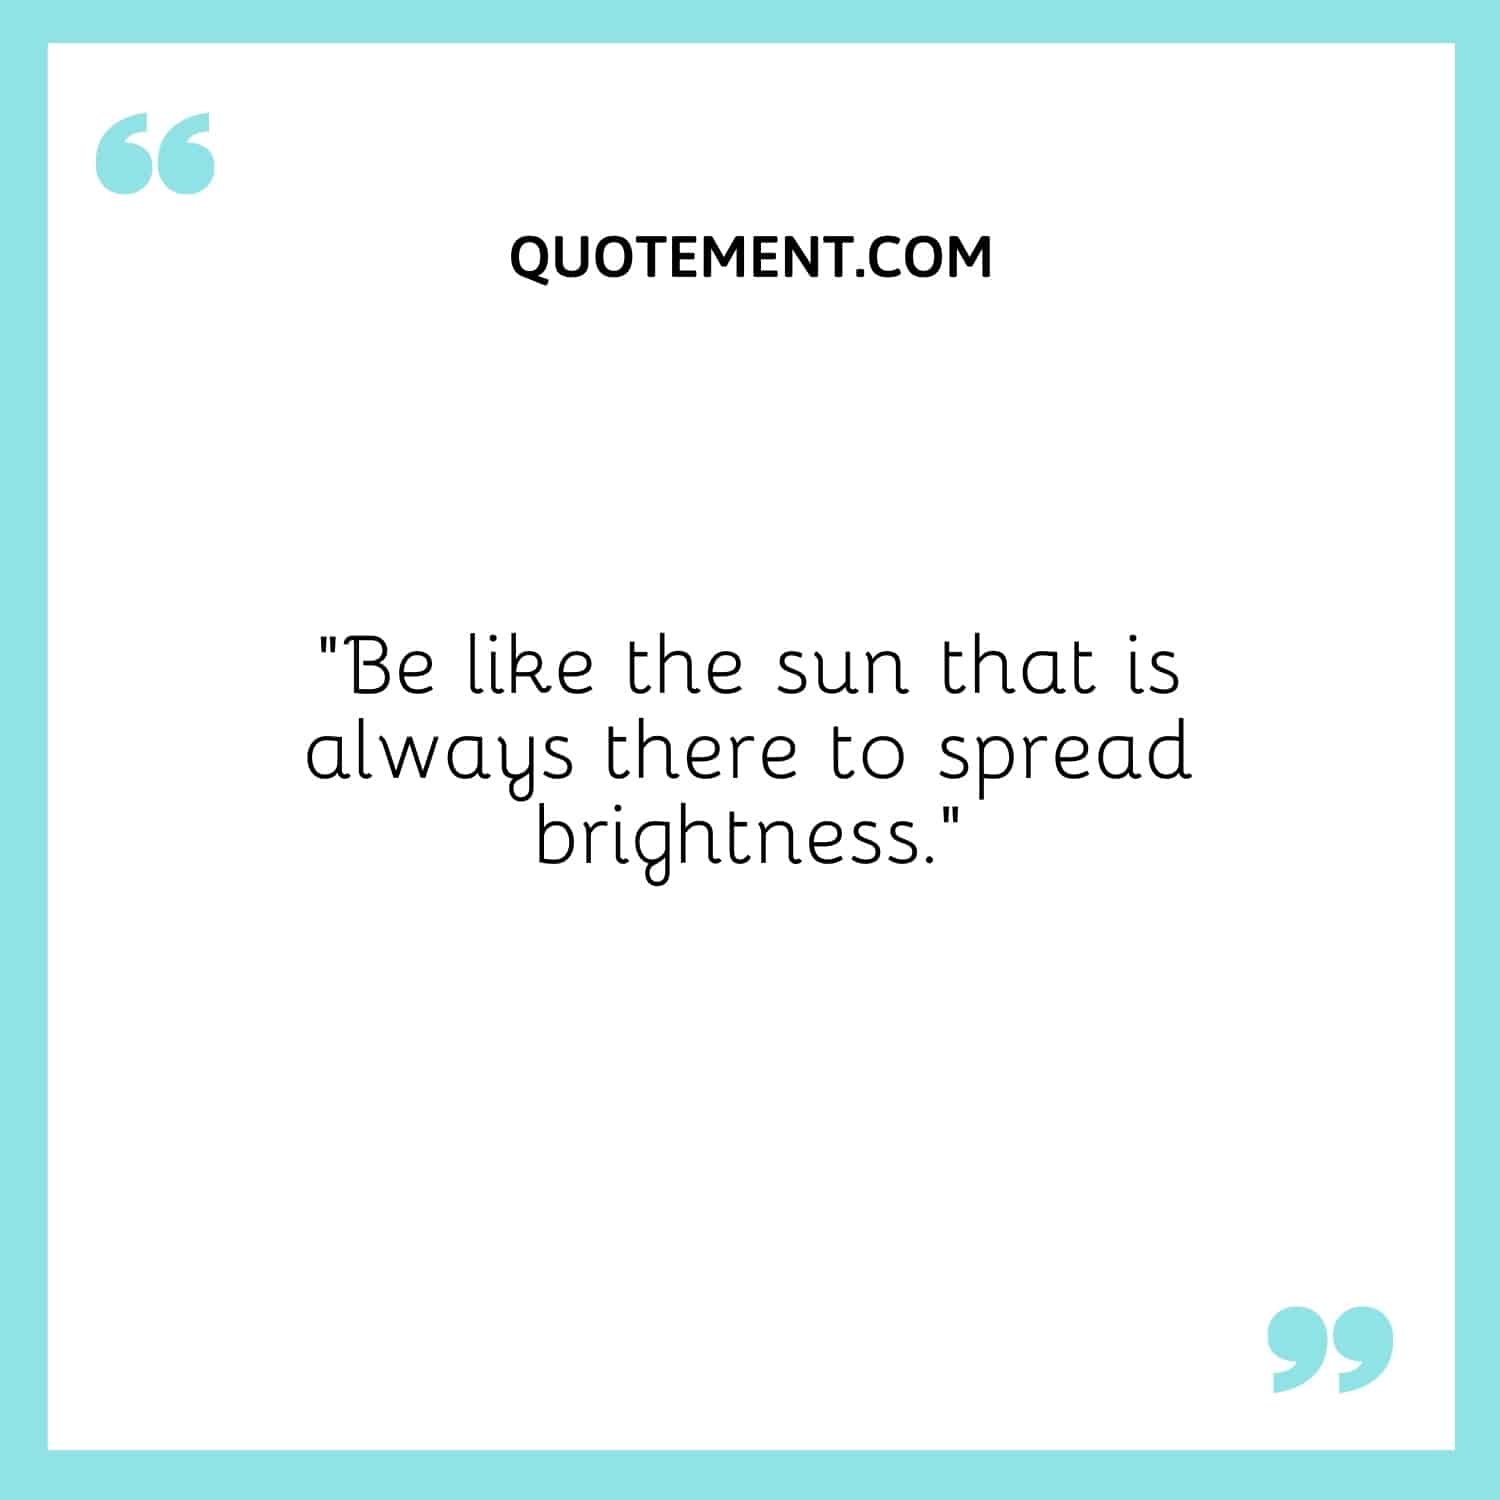 Be like the sun that is always there to spread brightness